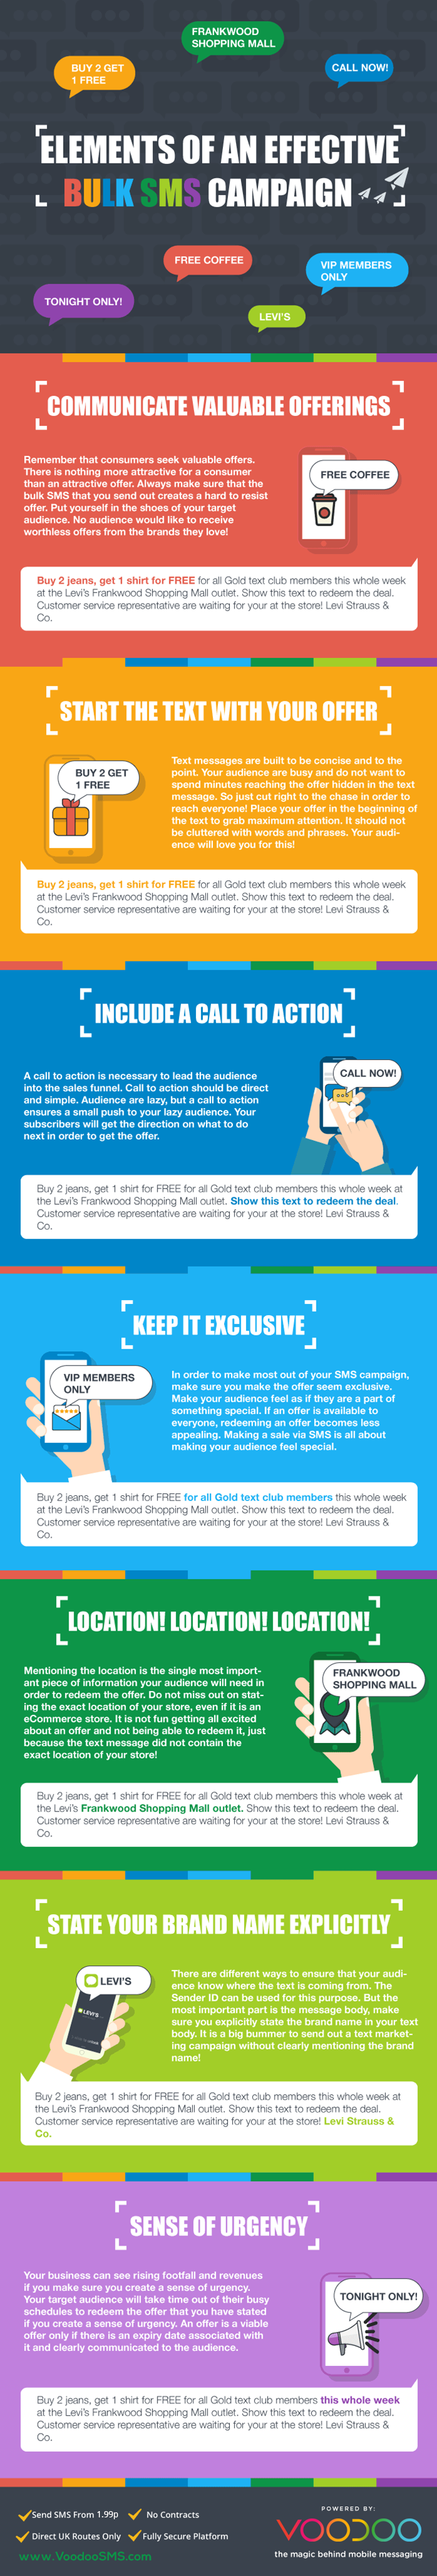 ELEMENTS OF AN EFFECTIVE BULK SMS CAMPAIGN